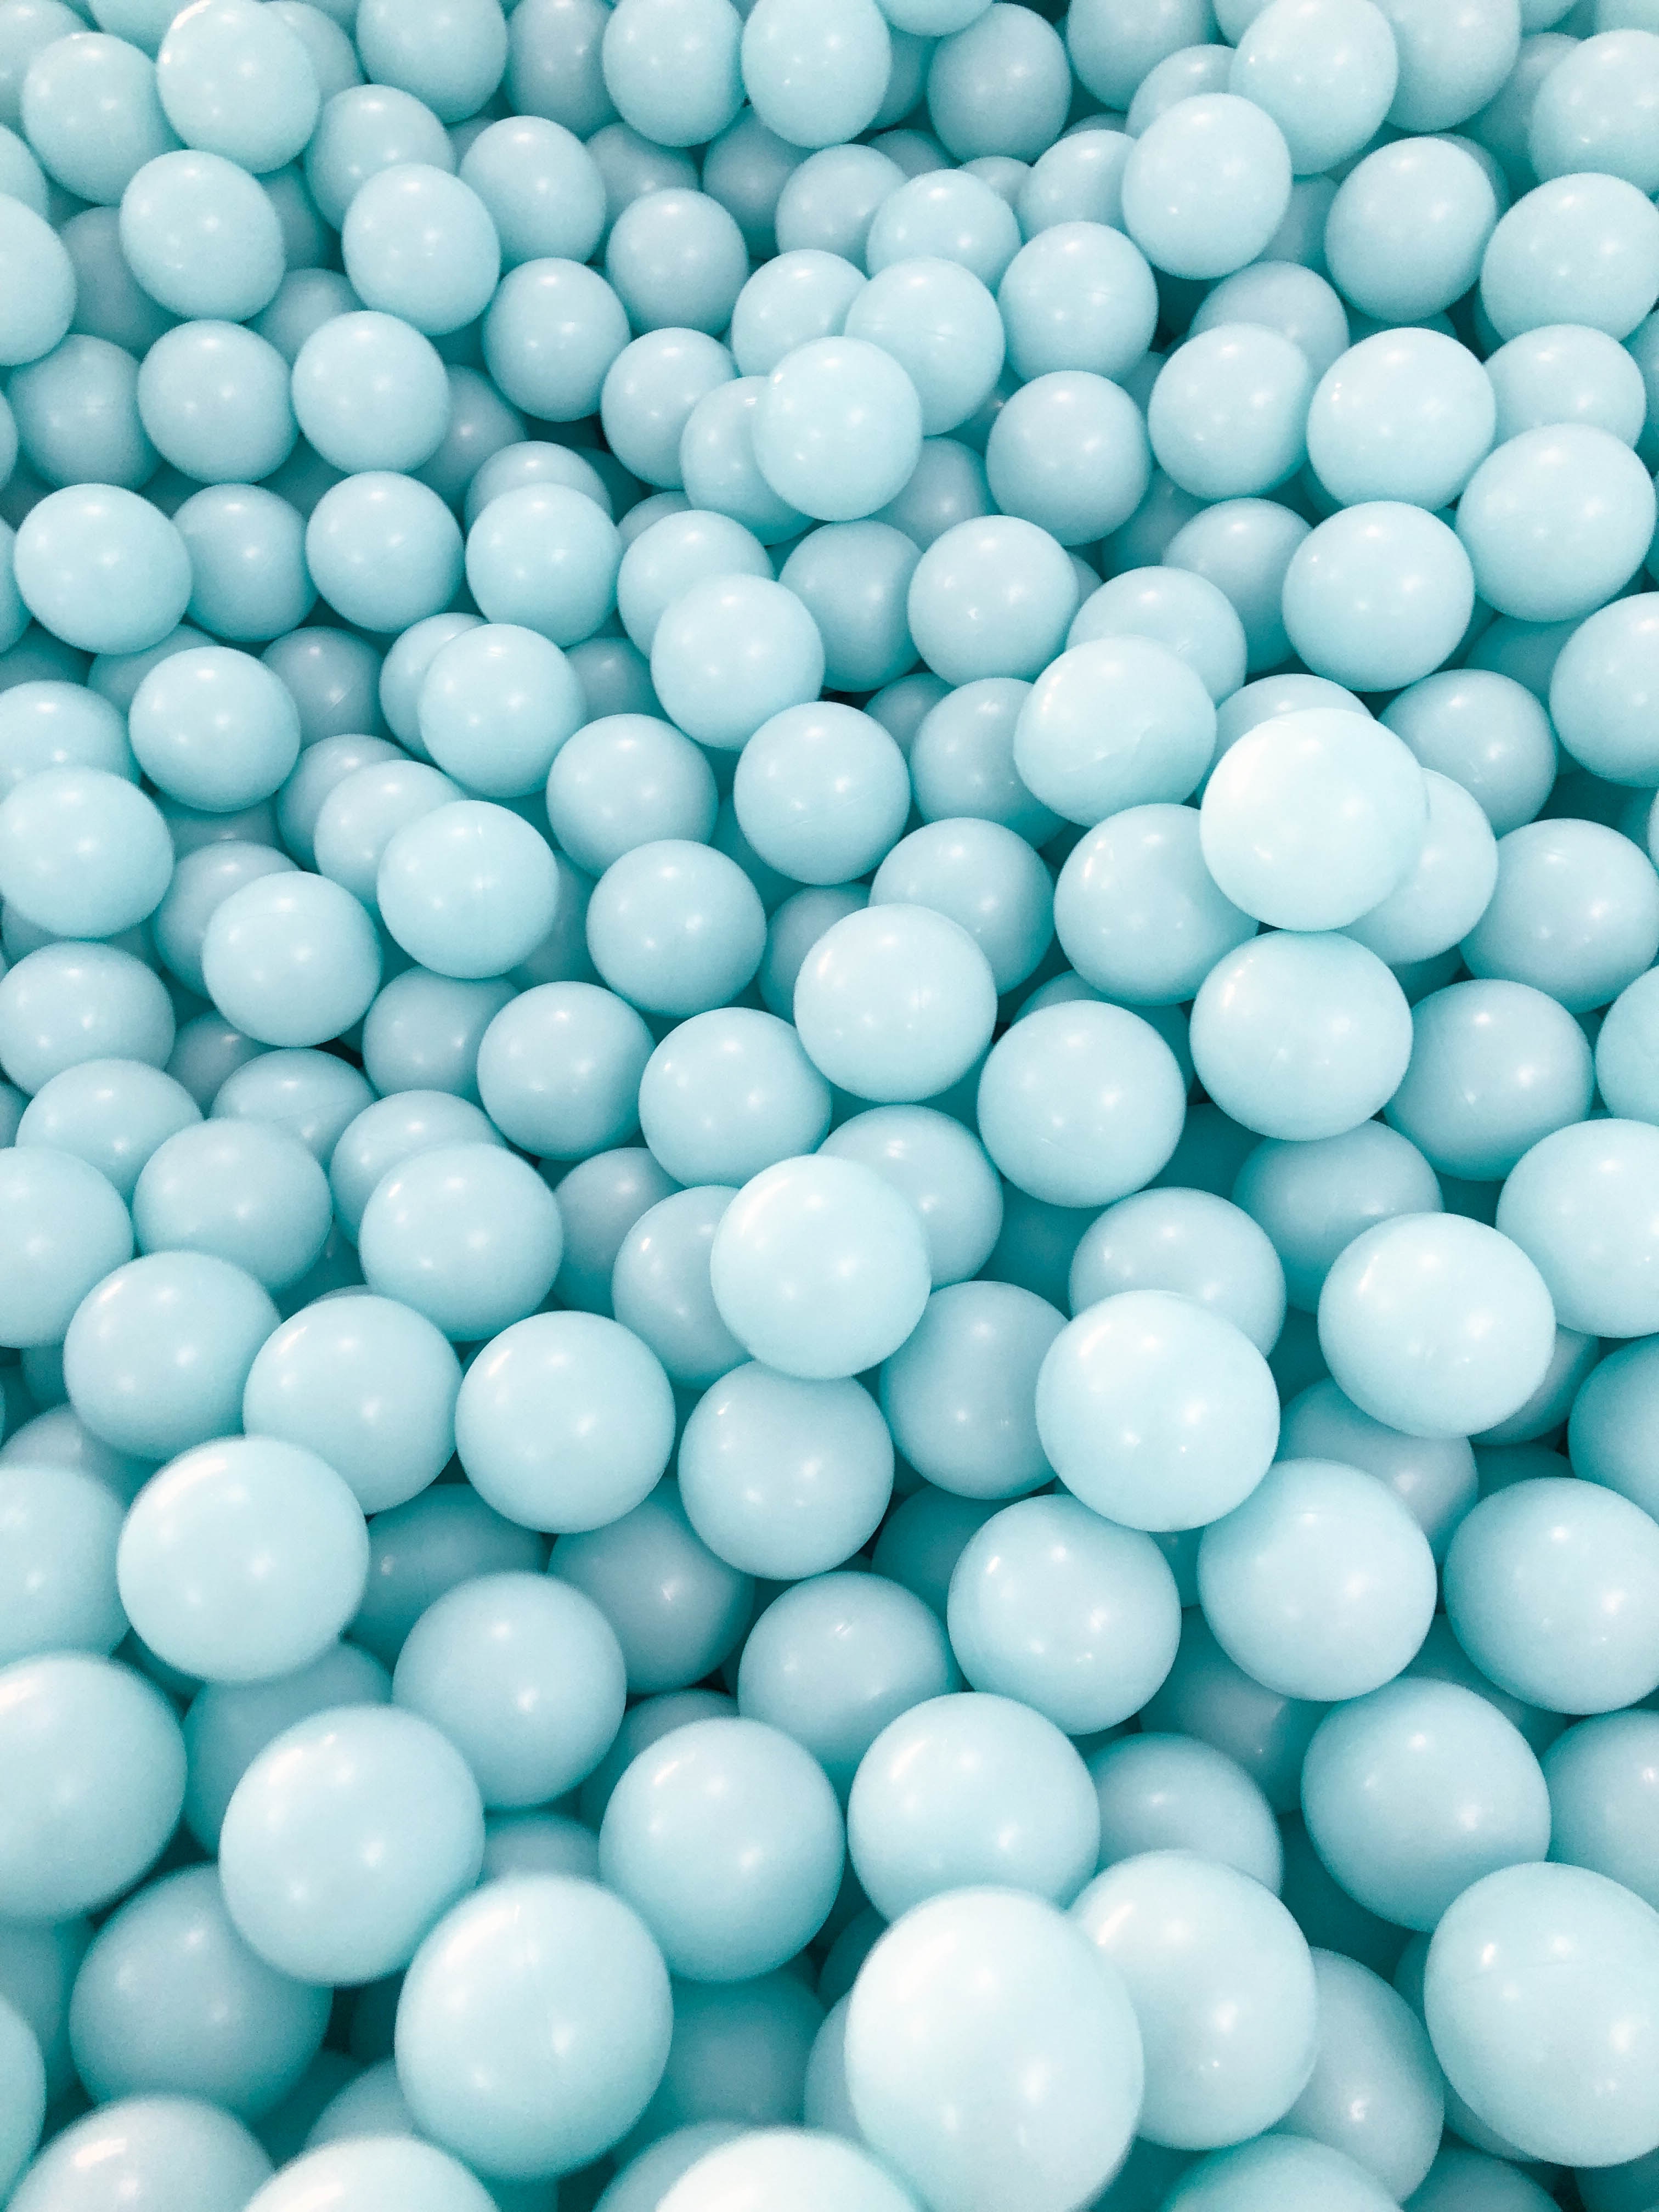 form, balls, miscellanea, light, miscellaneous, light coloured, lots of, multitude cell phone wallpapers